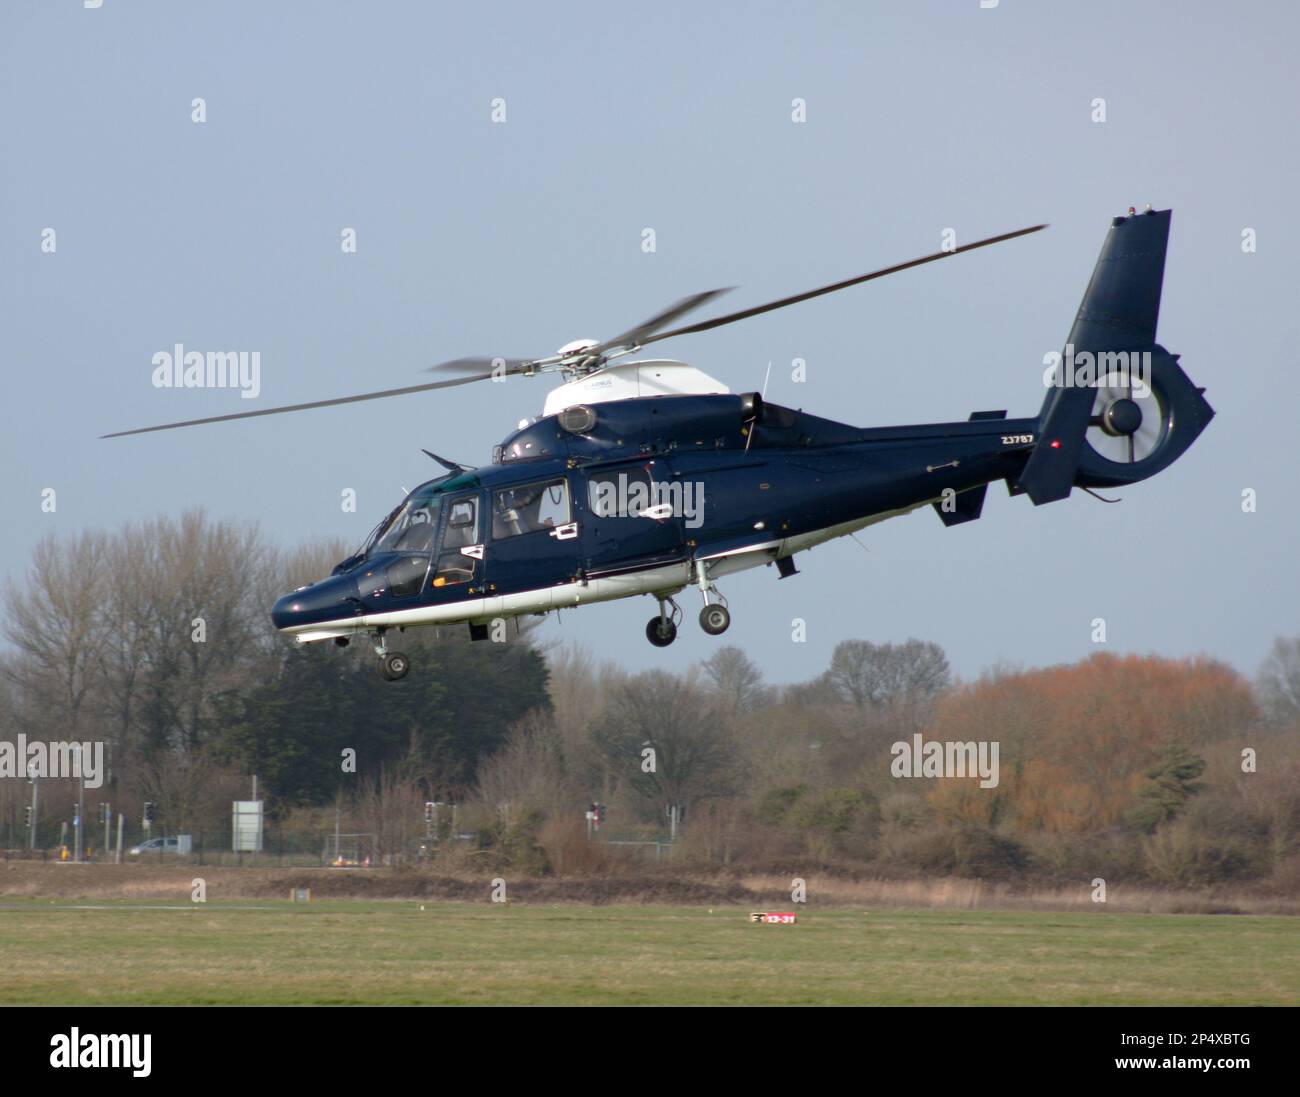 UK Army Air Corps Eurocopter AS 365N3 Dauphin departs Brighton City Airport Stock Photo